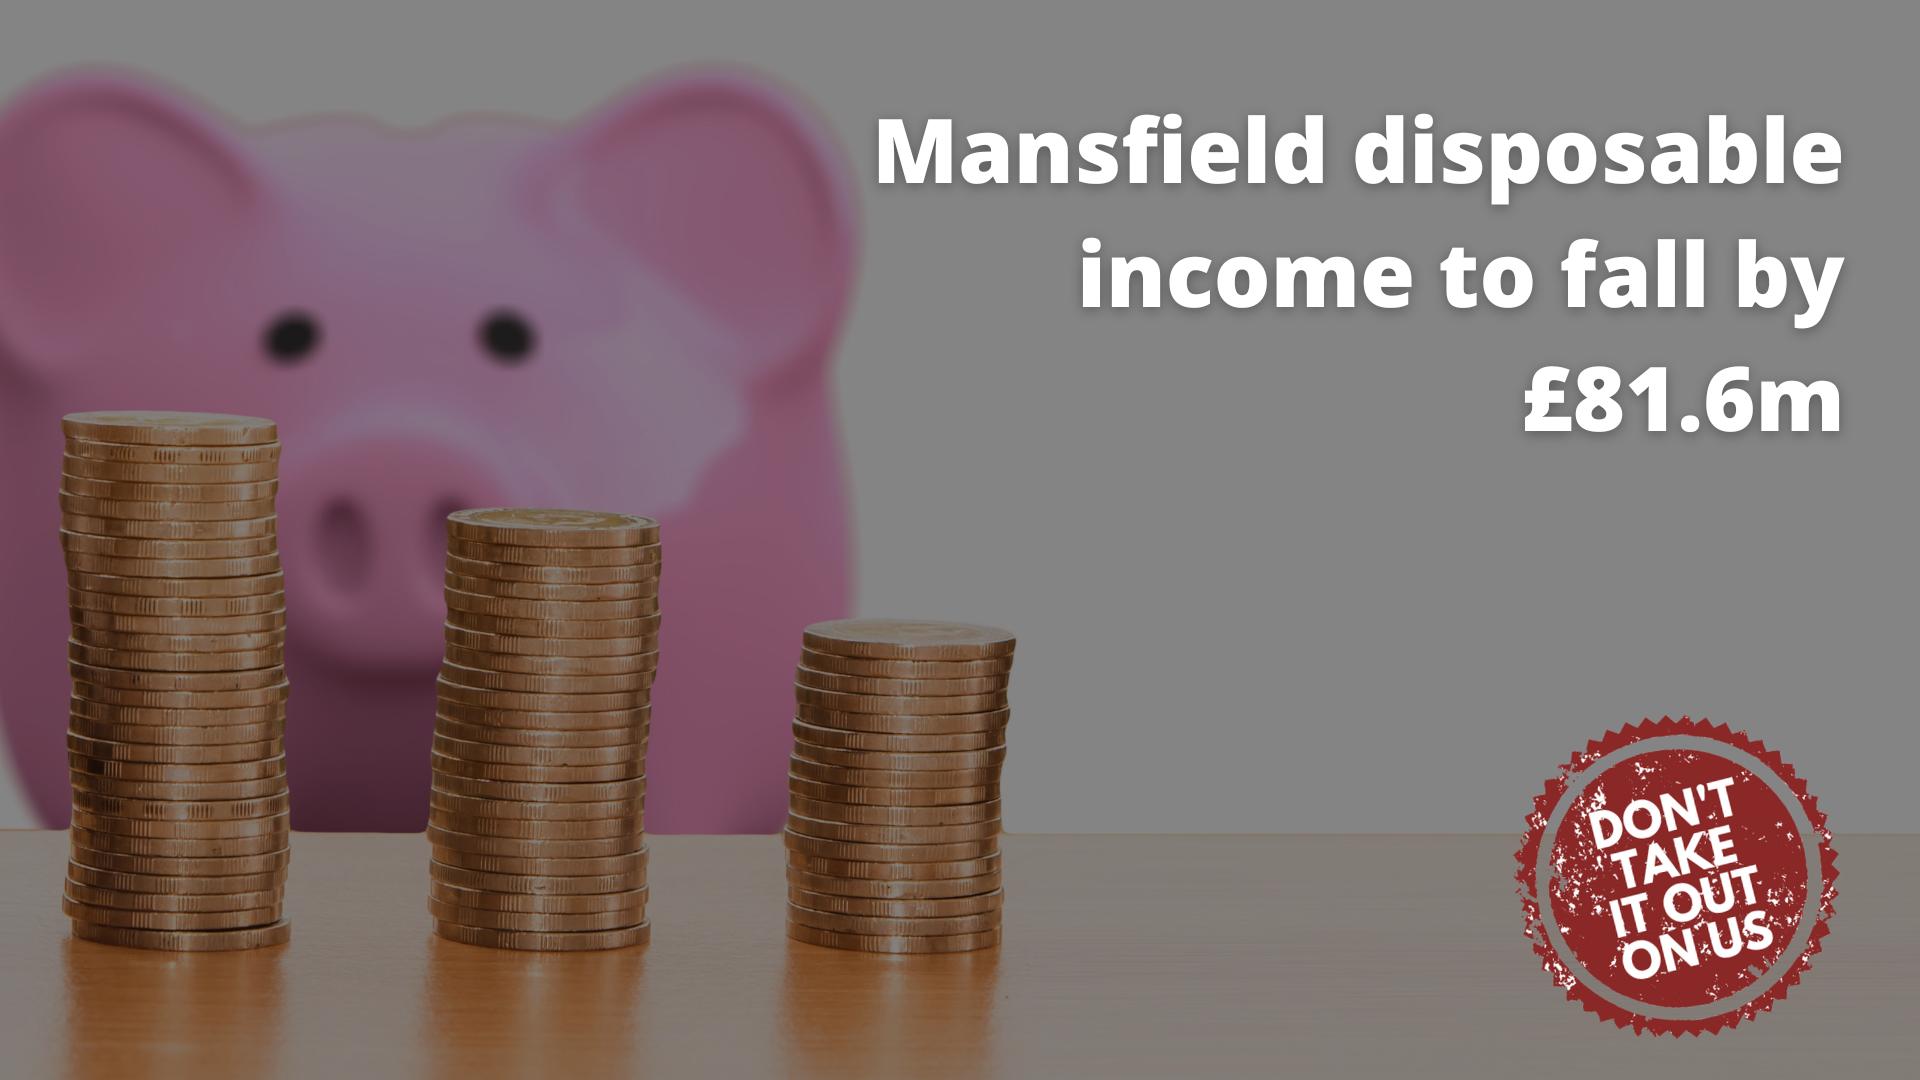 Mansfield disposable income to fall by £81.6m